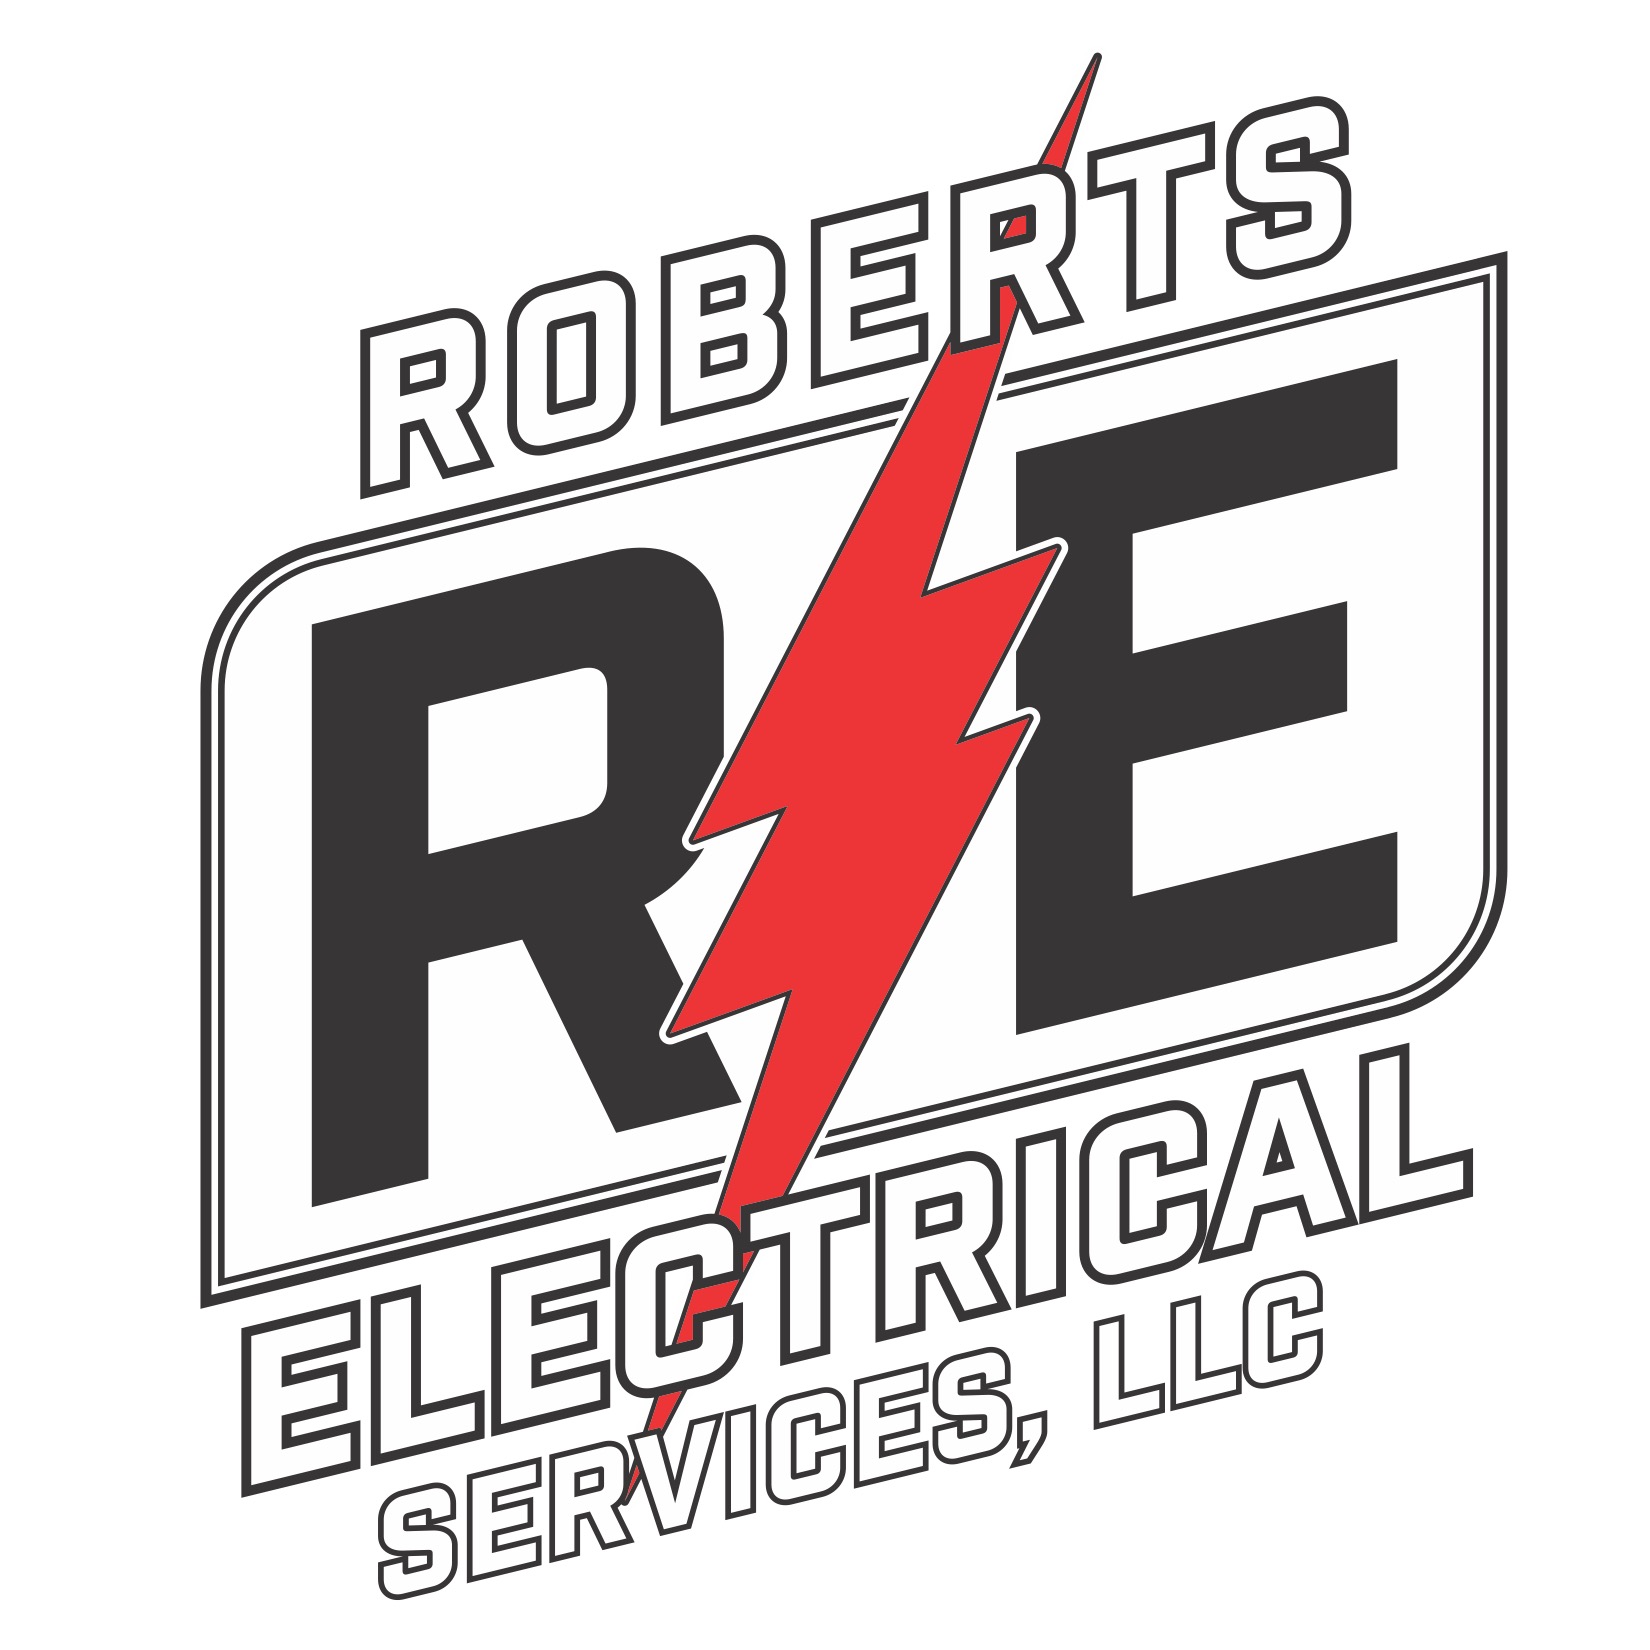 Roberts Electrical Services, LLC 36 Romain Ave, Pompton Lakes New Jersey 07442